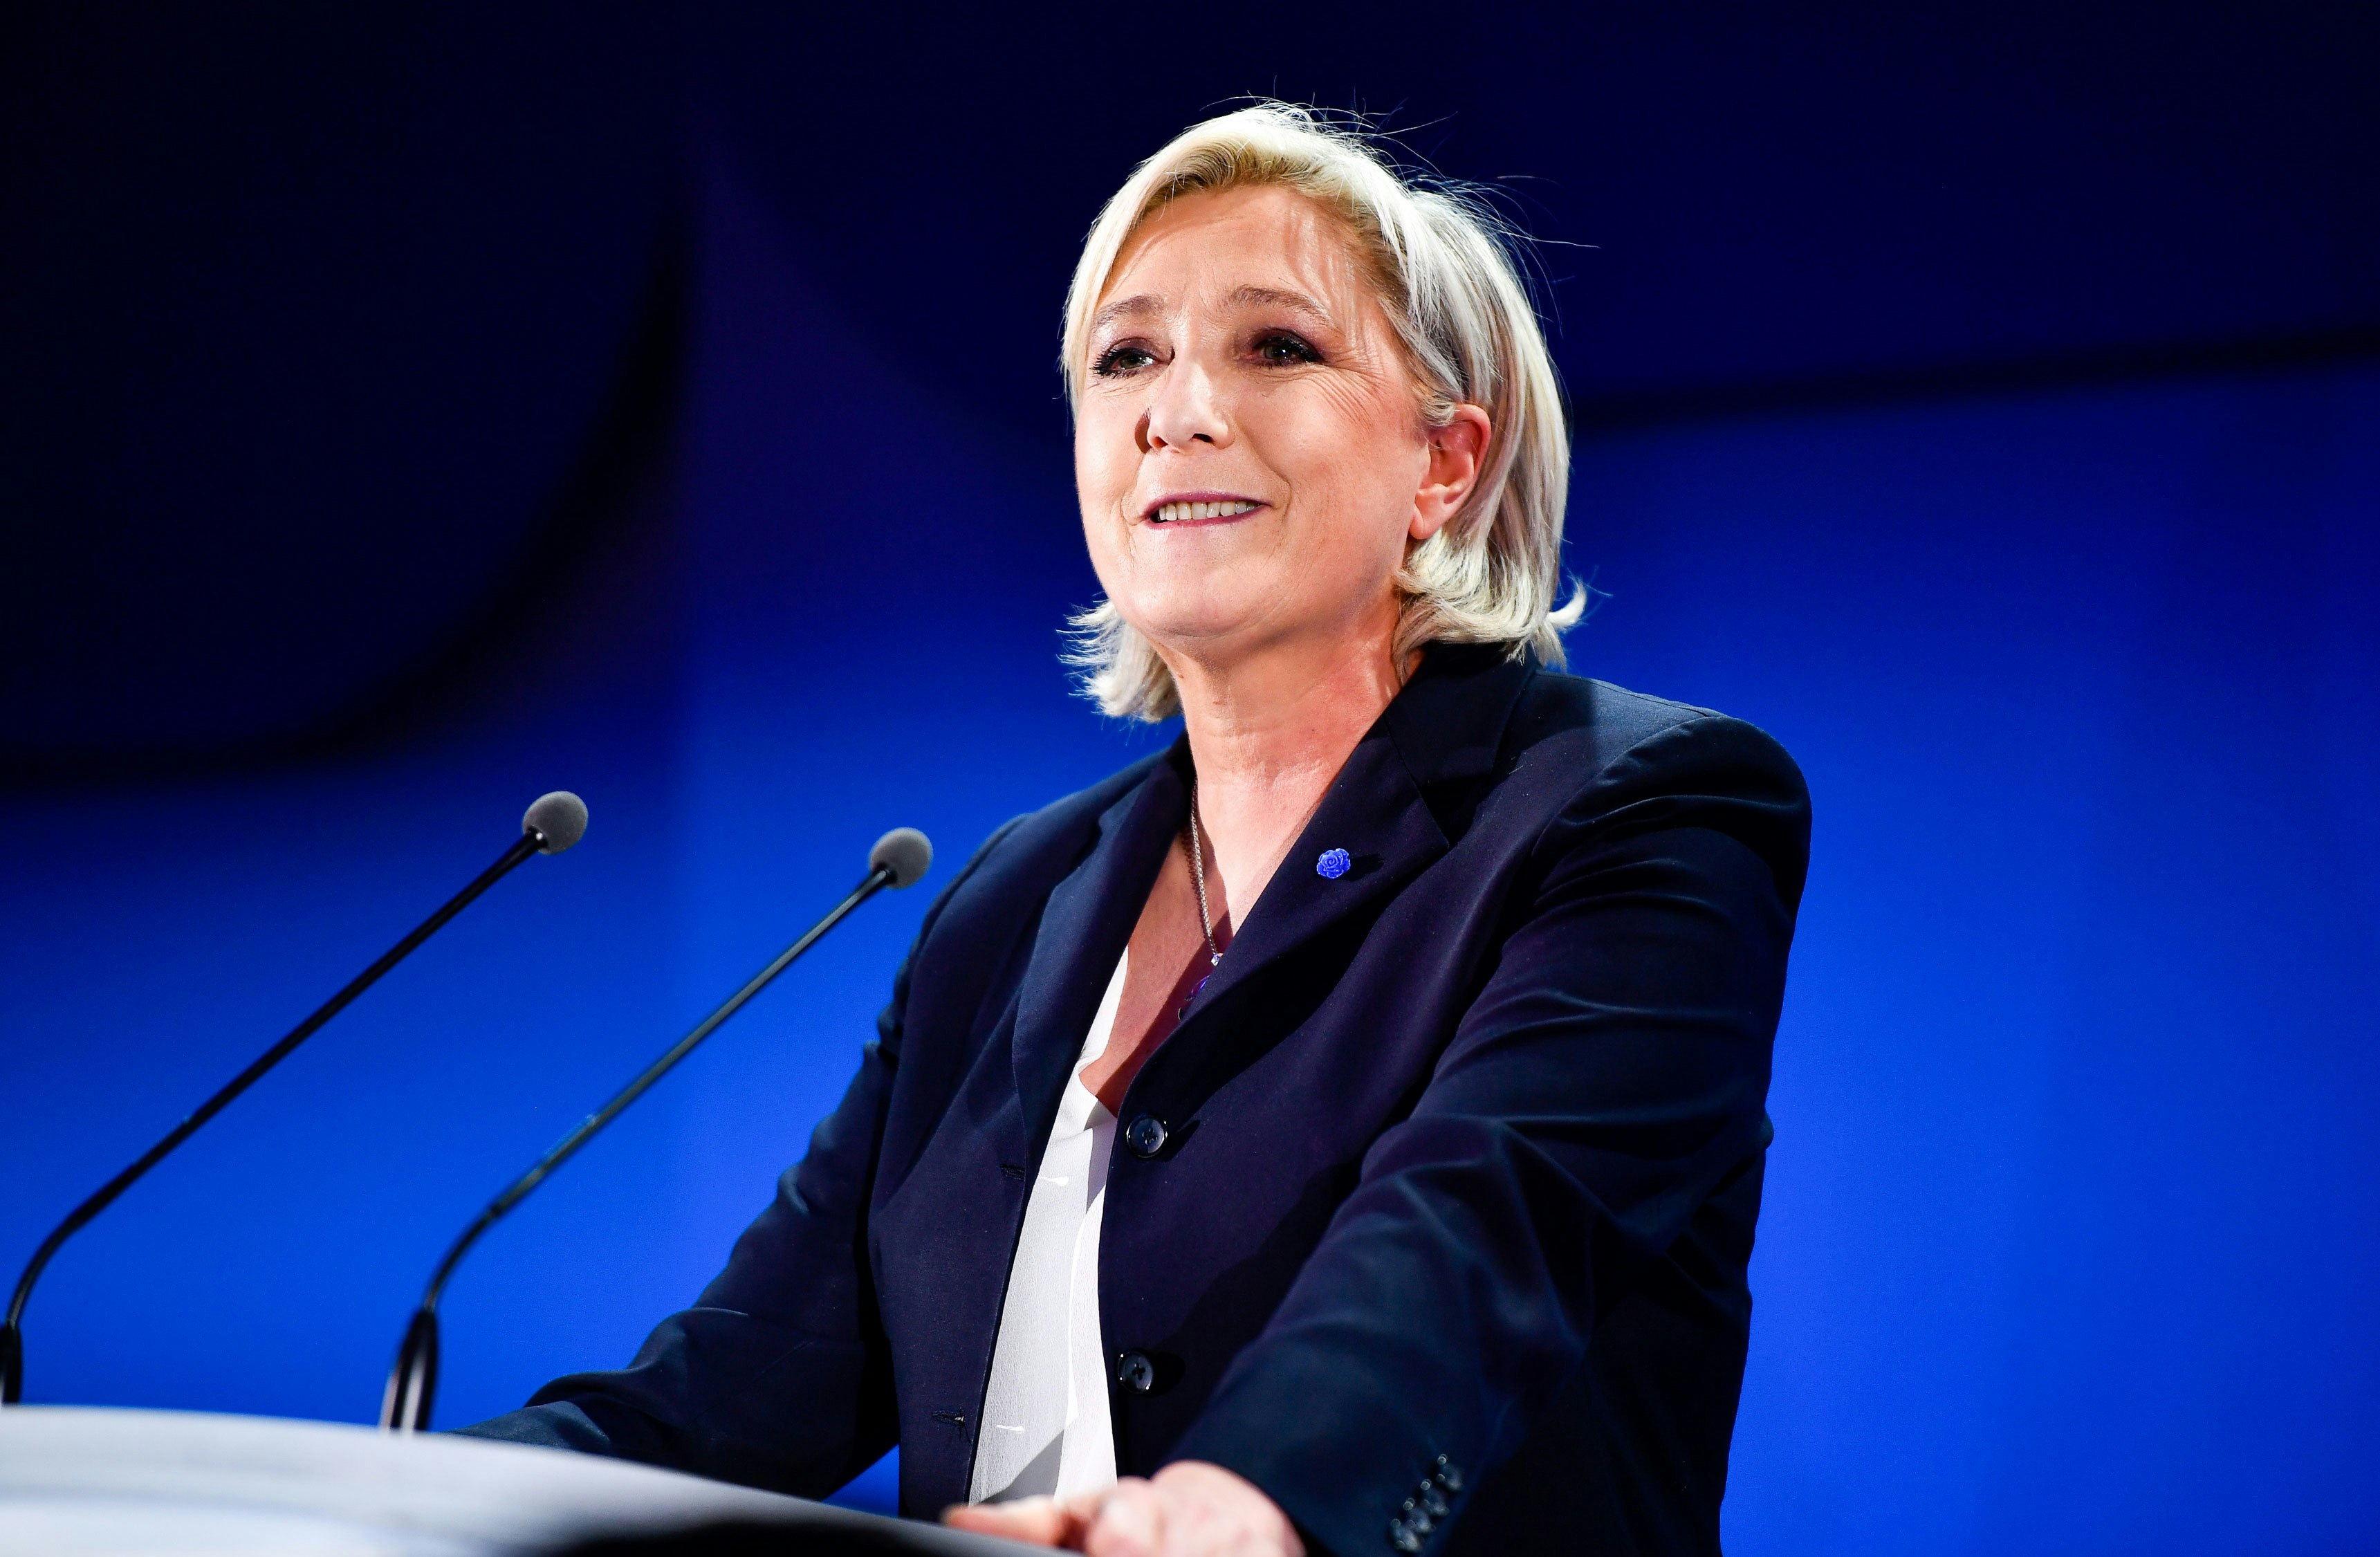 Marine Le Pen, Biography, Policies, Party, Father, & Facts